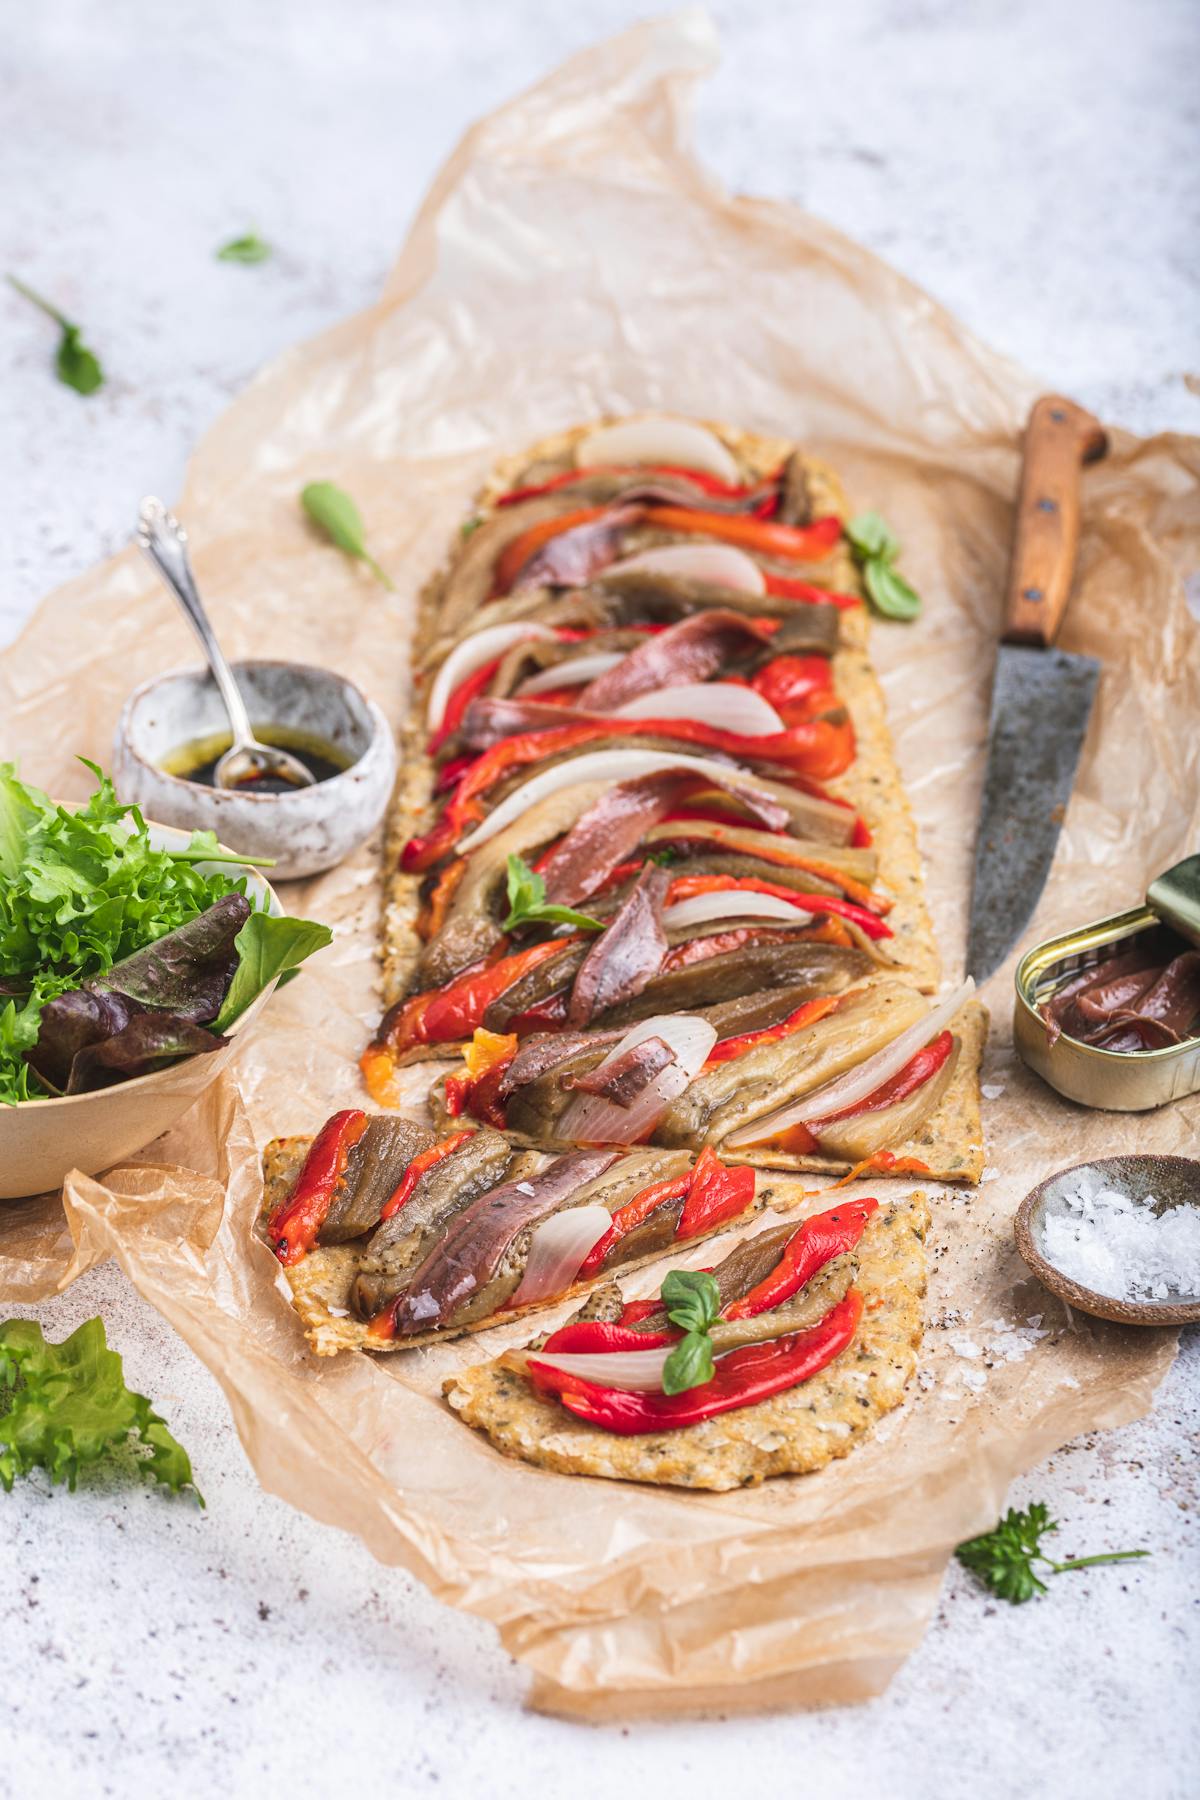 Mediterranean high protein pizza with roasted vegetables and anchovies